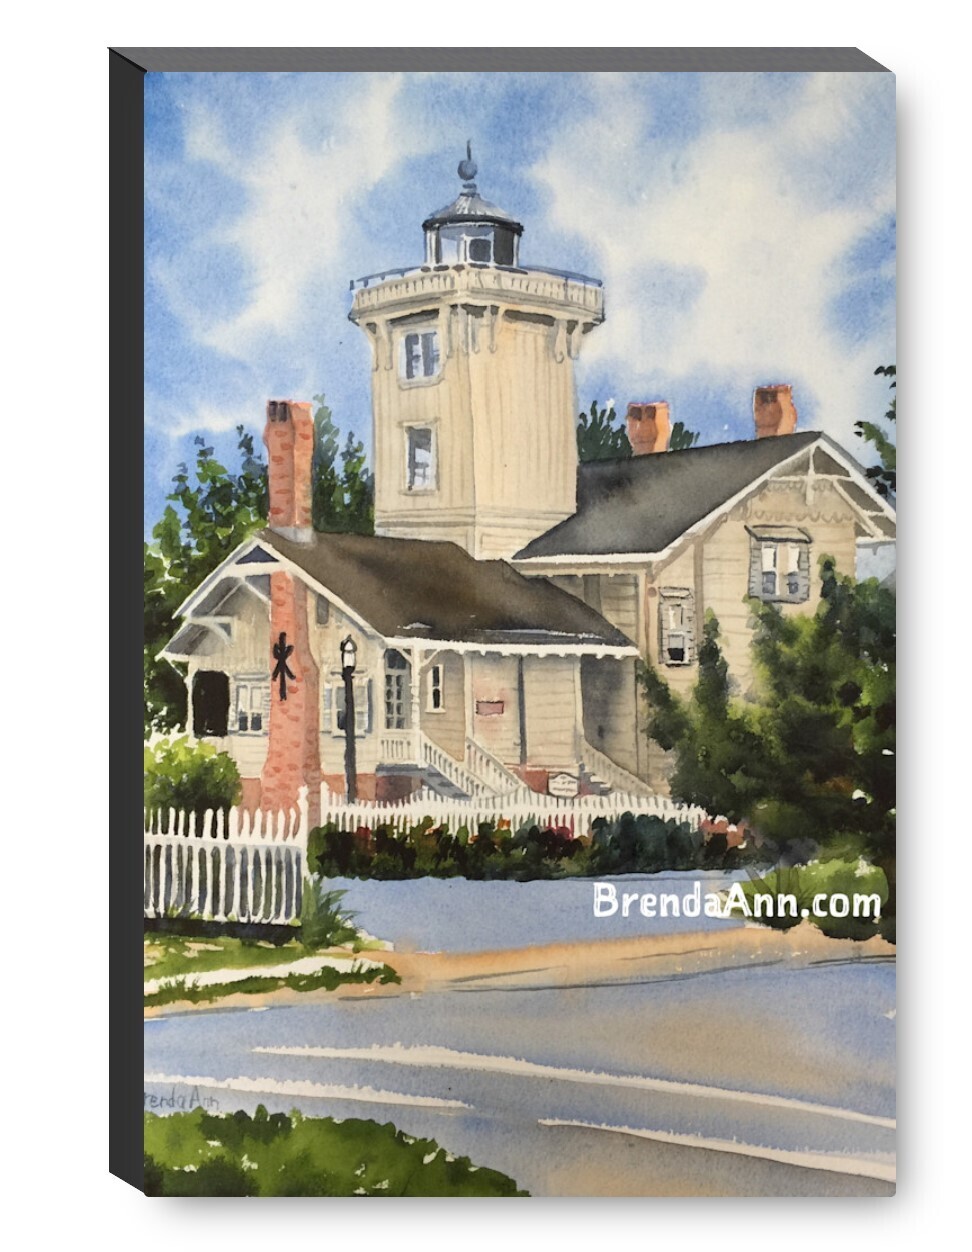 Hereford Inlet Lighthouse in North Wildwood NJ Canvas Gallery Wrapped Print - Watercolor Art - Ready to hang on a wall